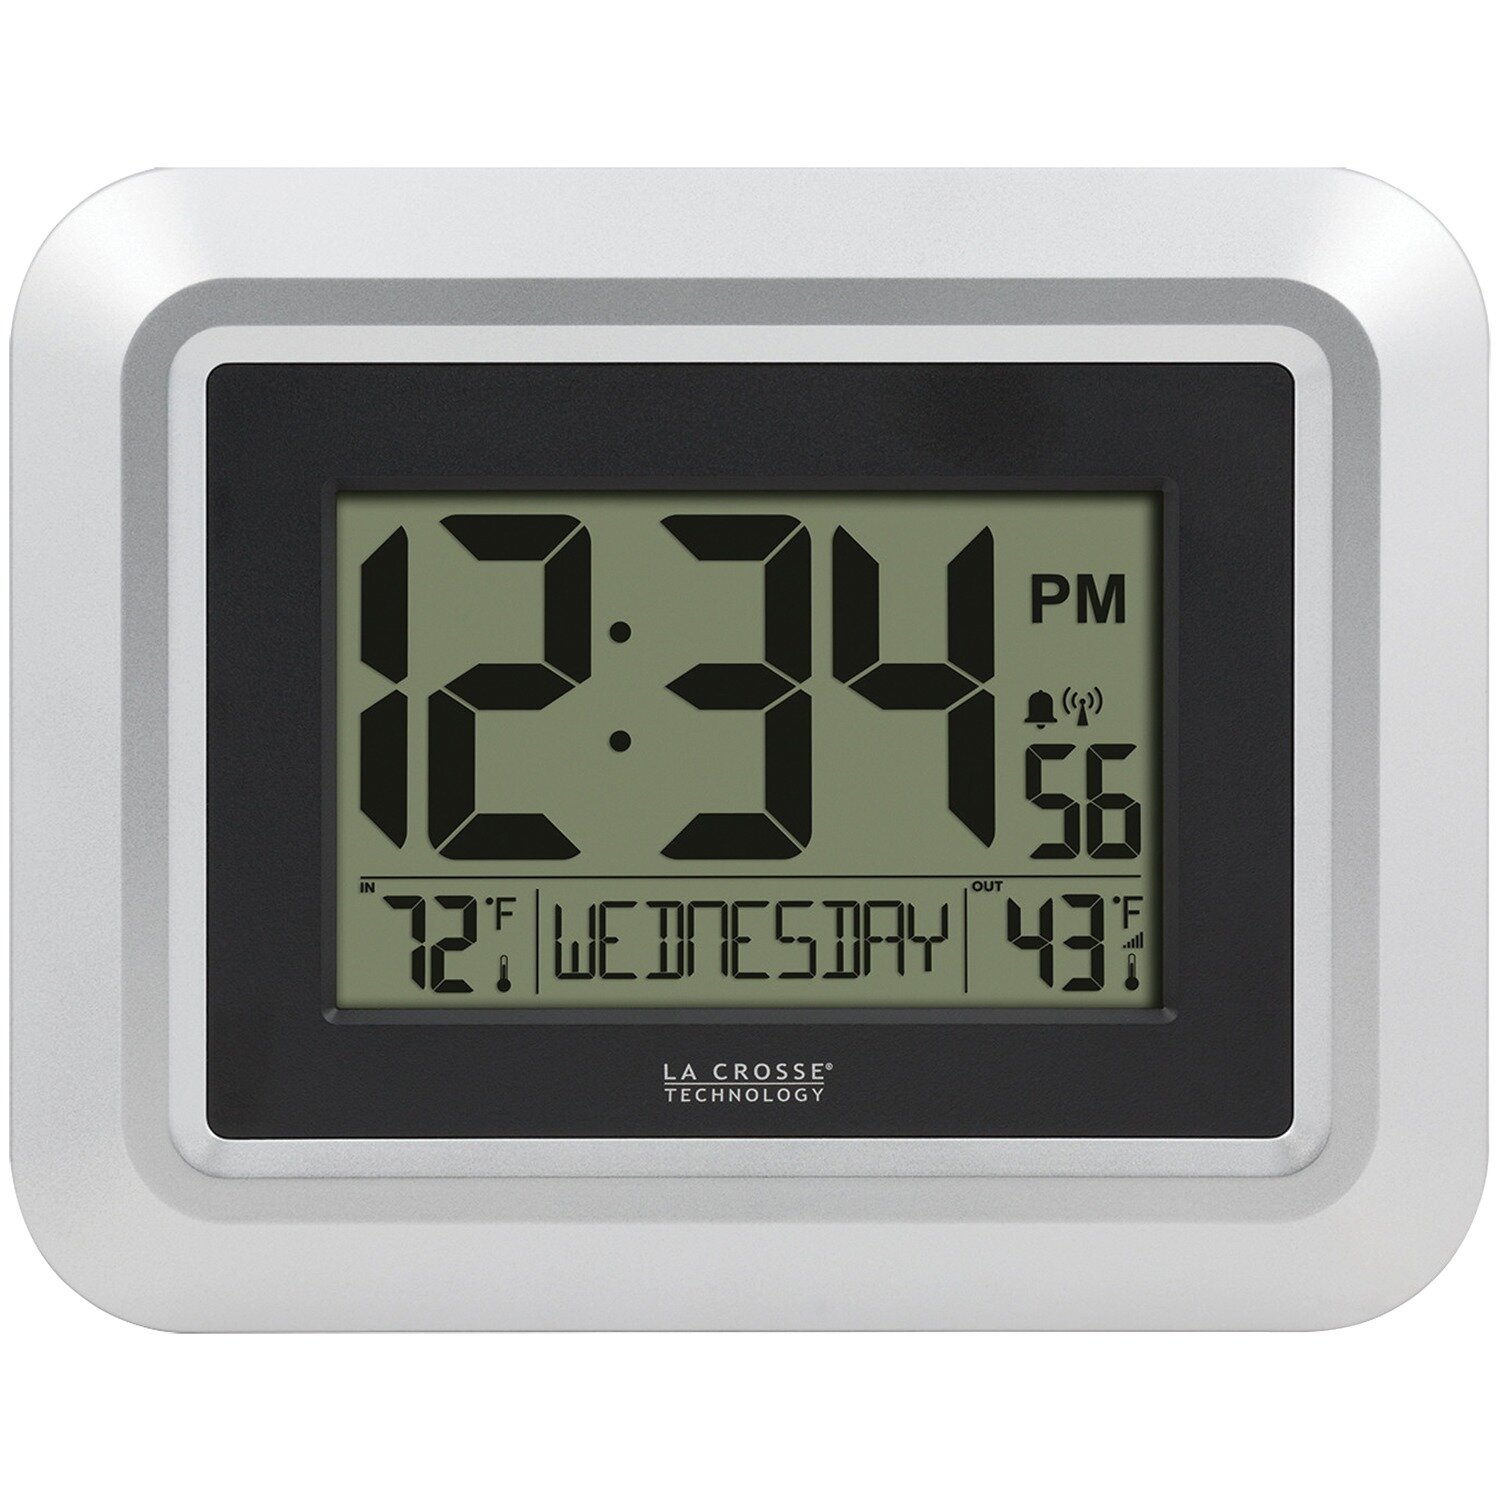 Details about   La Crosse Technology Atomic Digital Wall Clock W/ Indoor Outdoor Temperature NEW 